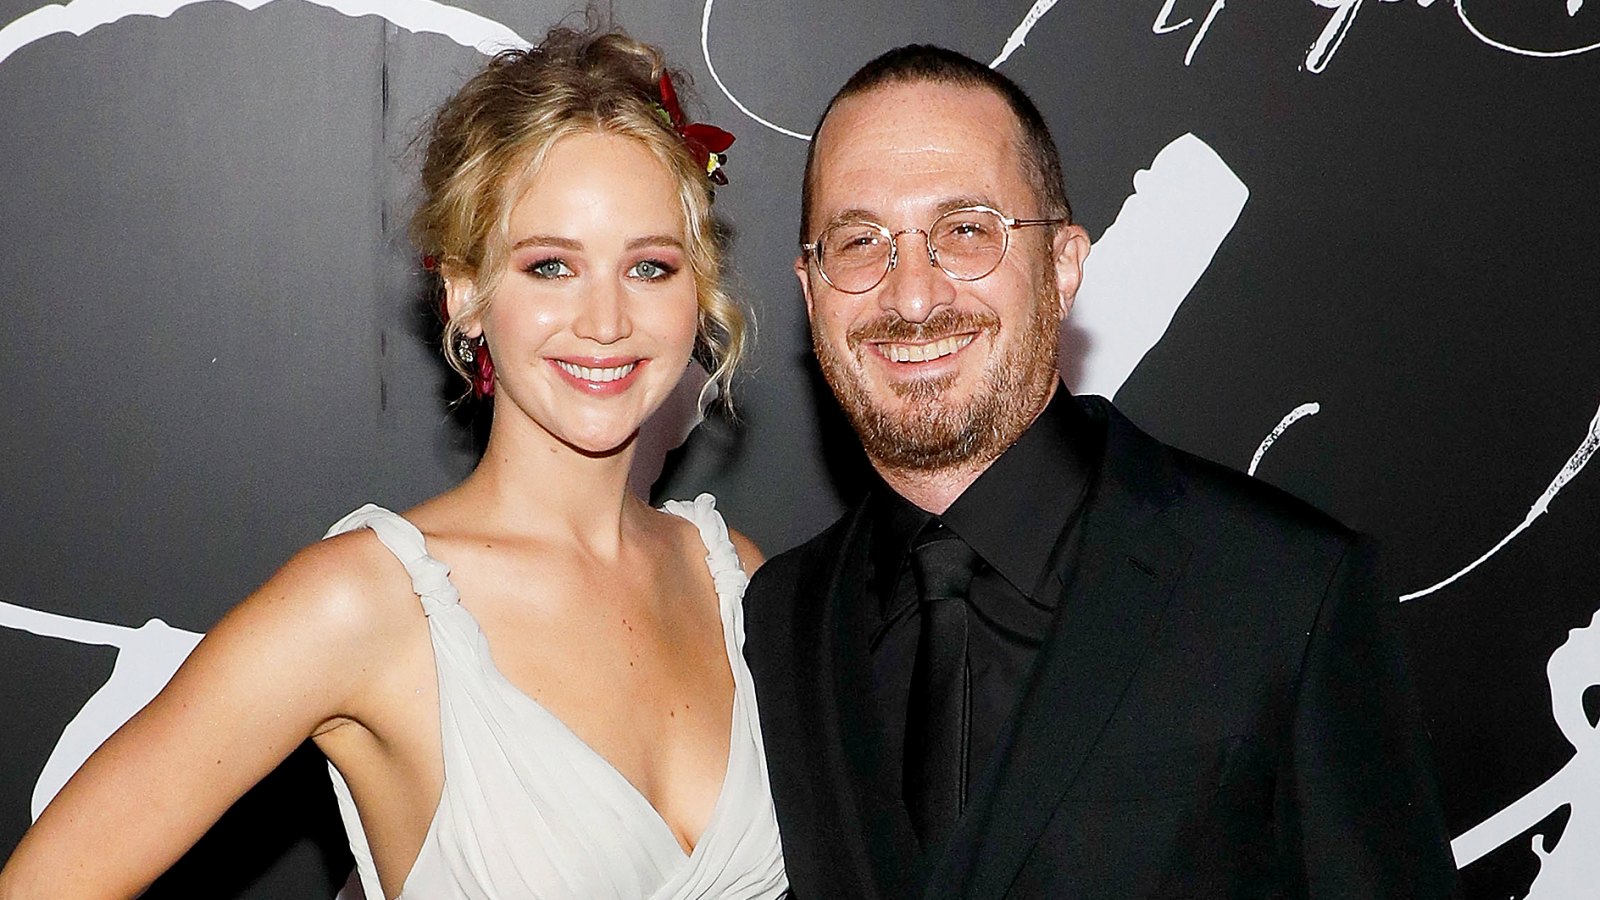 Jennifer Lawrence and Darren Aronofsky attend the premiere of "mother!" at Radio City Music Hall on September 13, 2017 in New York City.